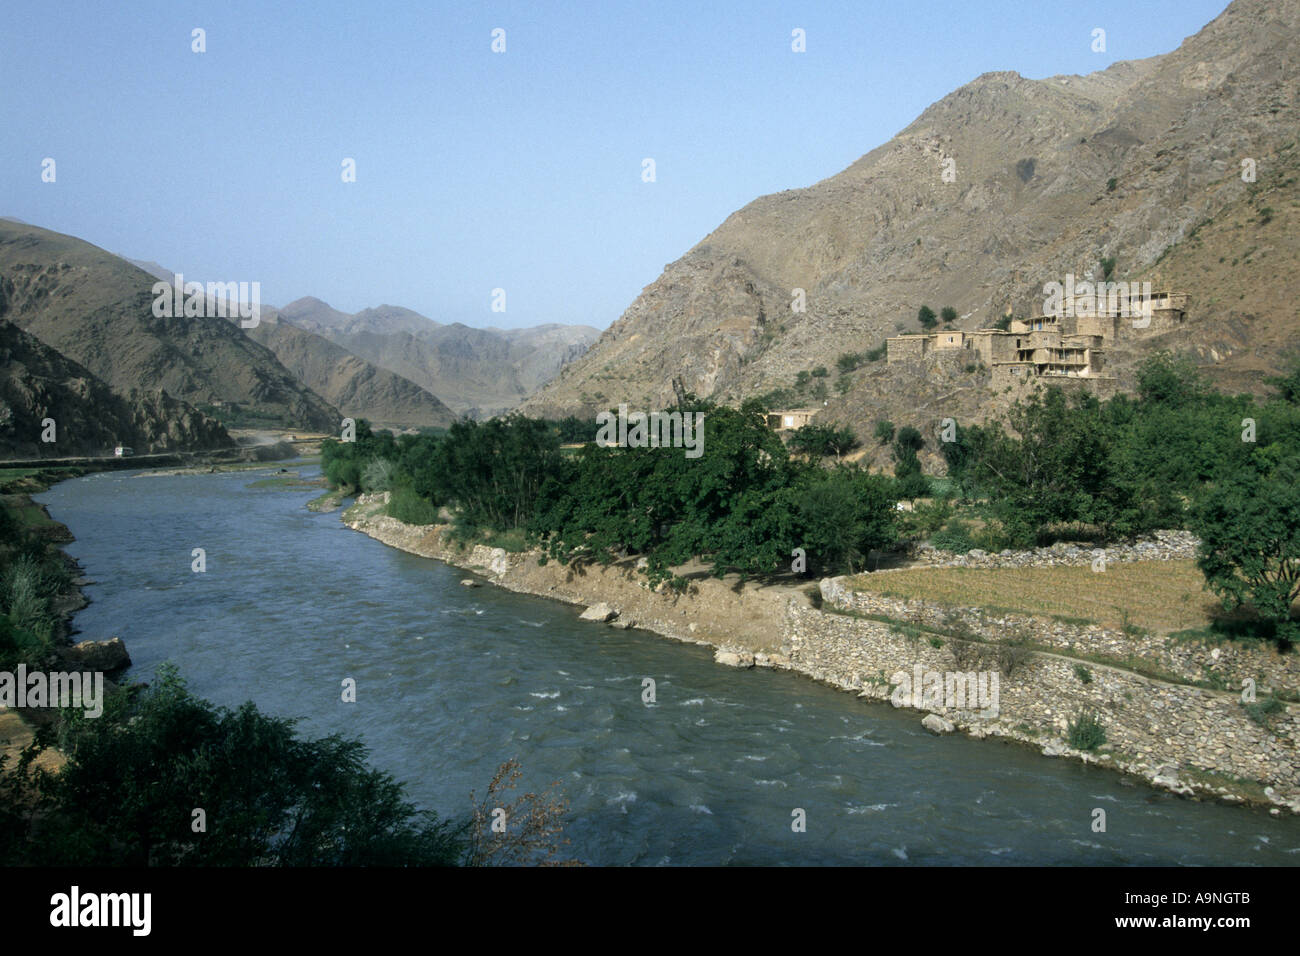 Afghanistan, province Parwan, Ghorband valley On the right basic houses built in the mountainside Stock Photo